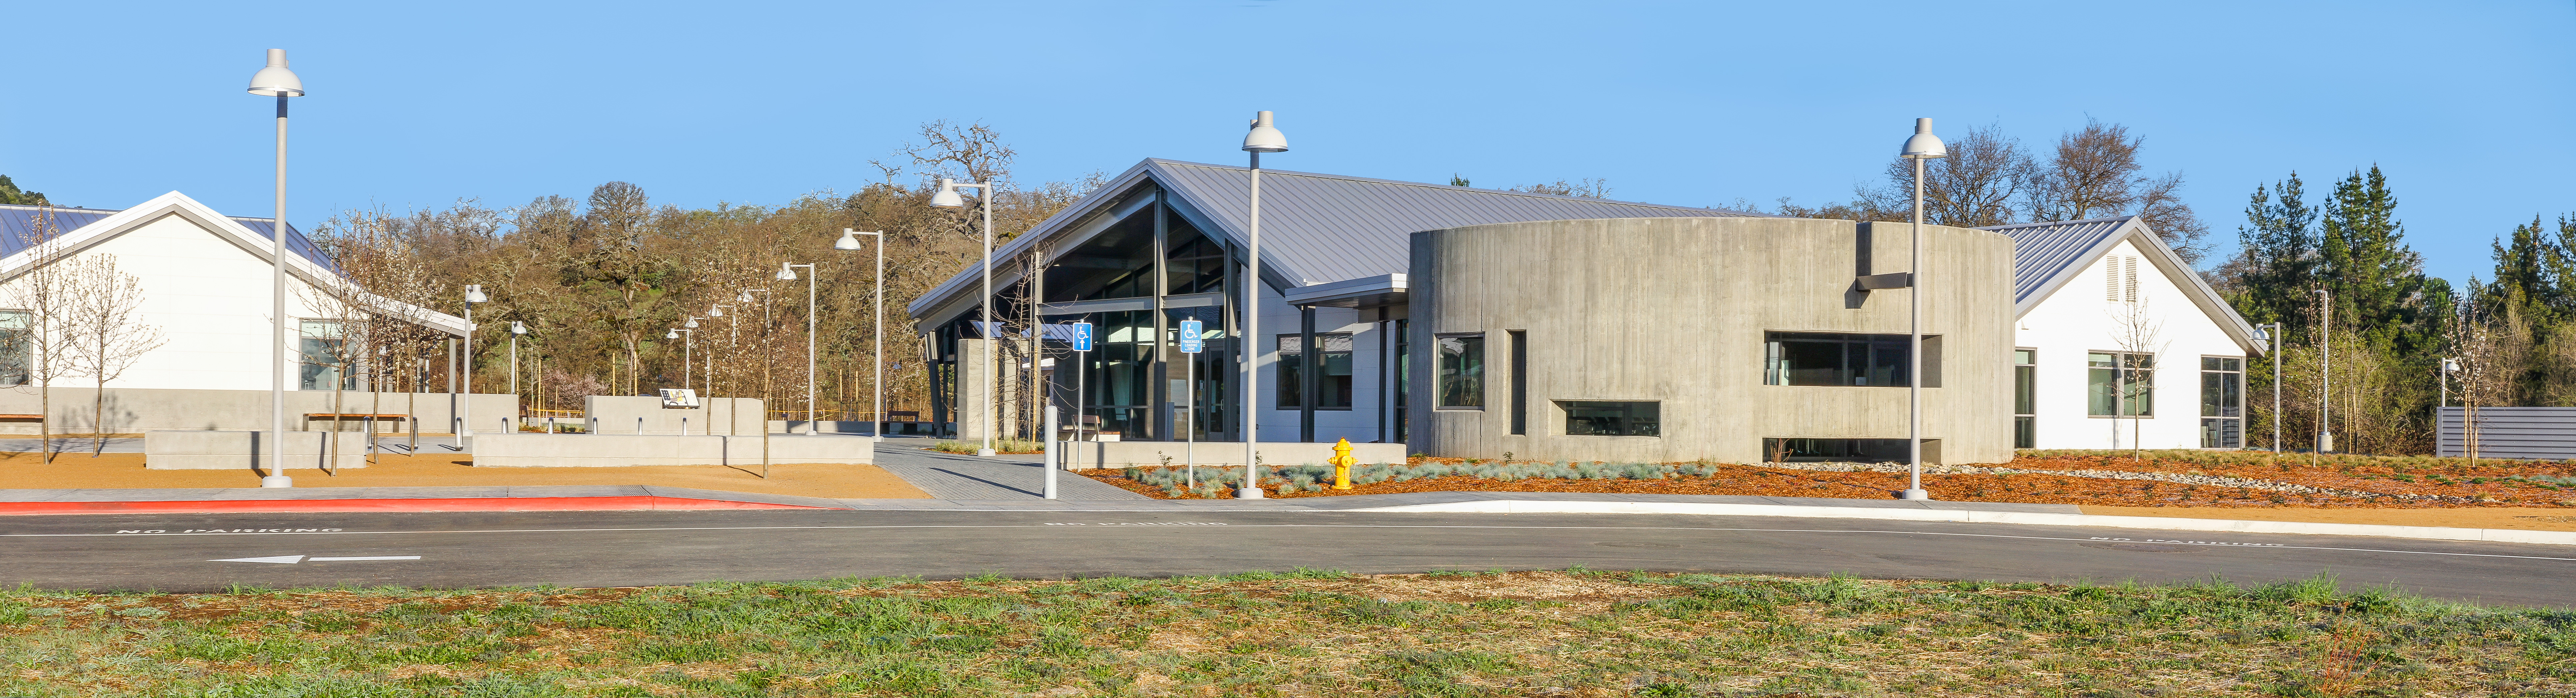 Photo of the Mendocino College Lake Center Buildings